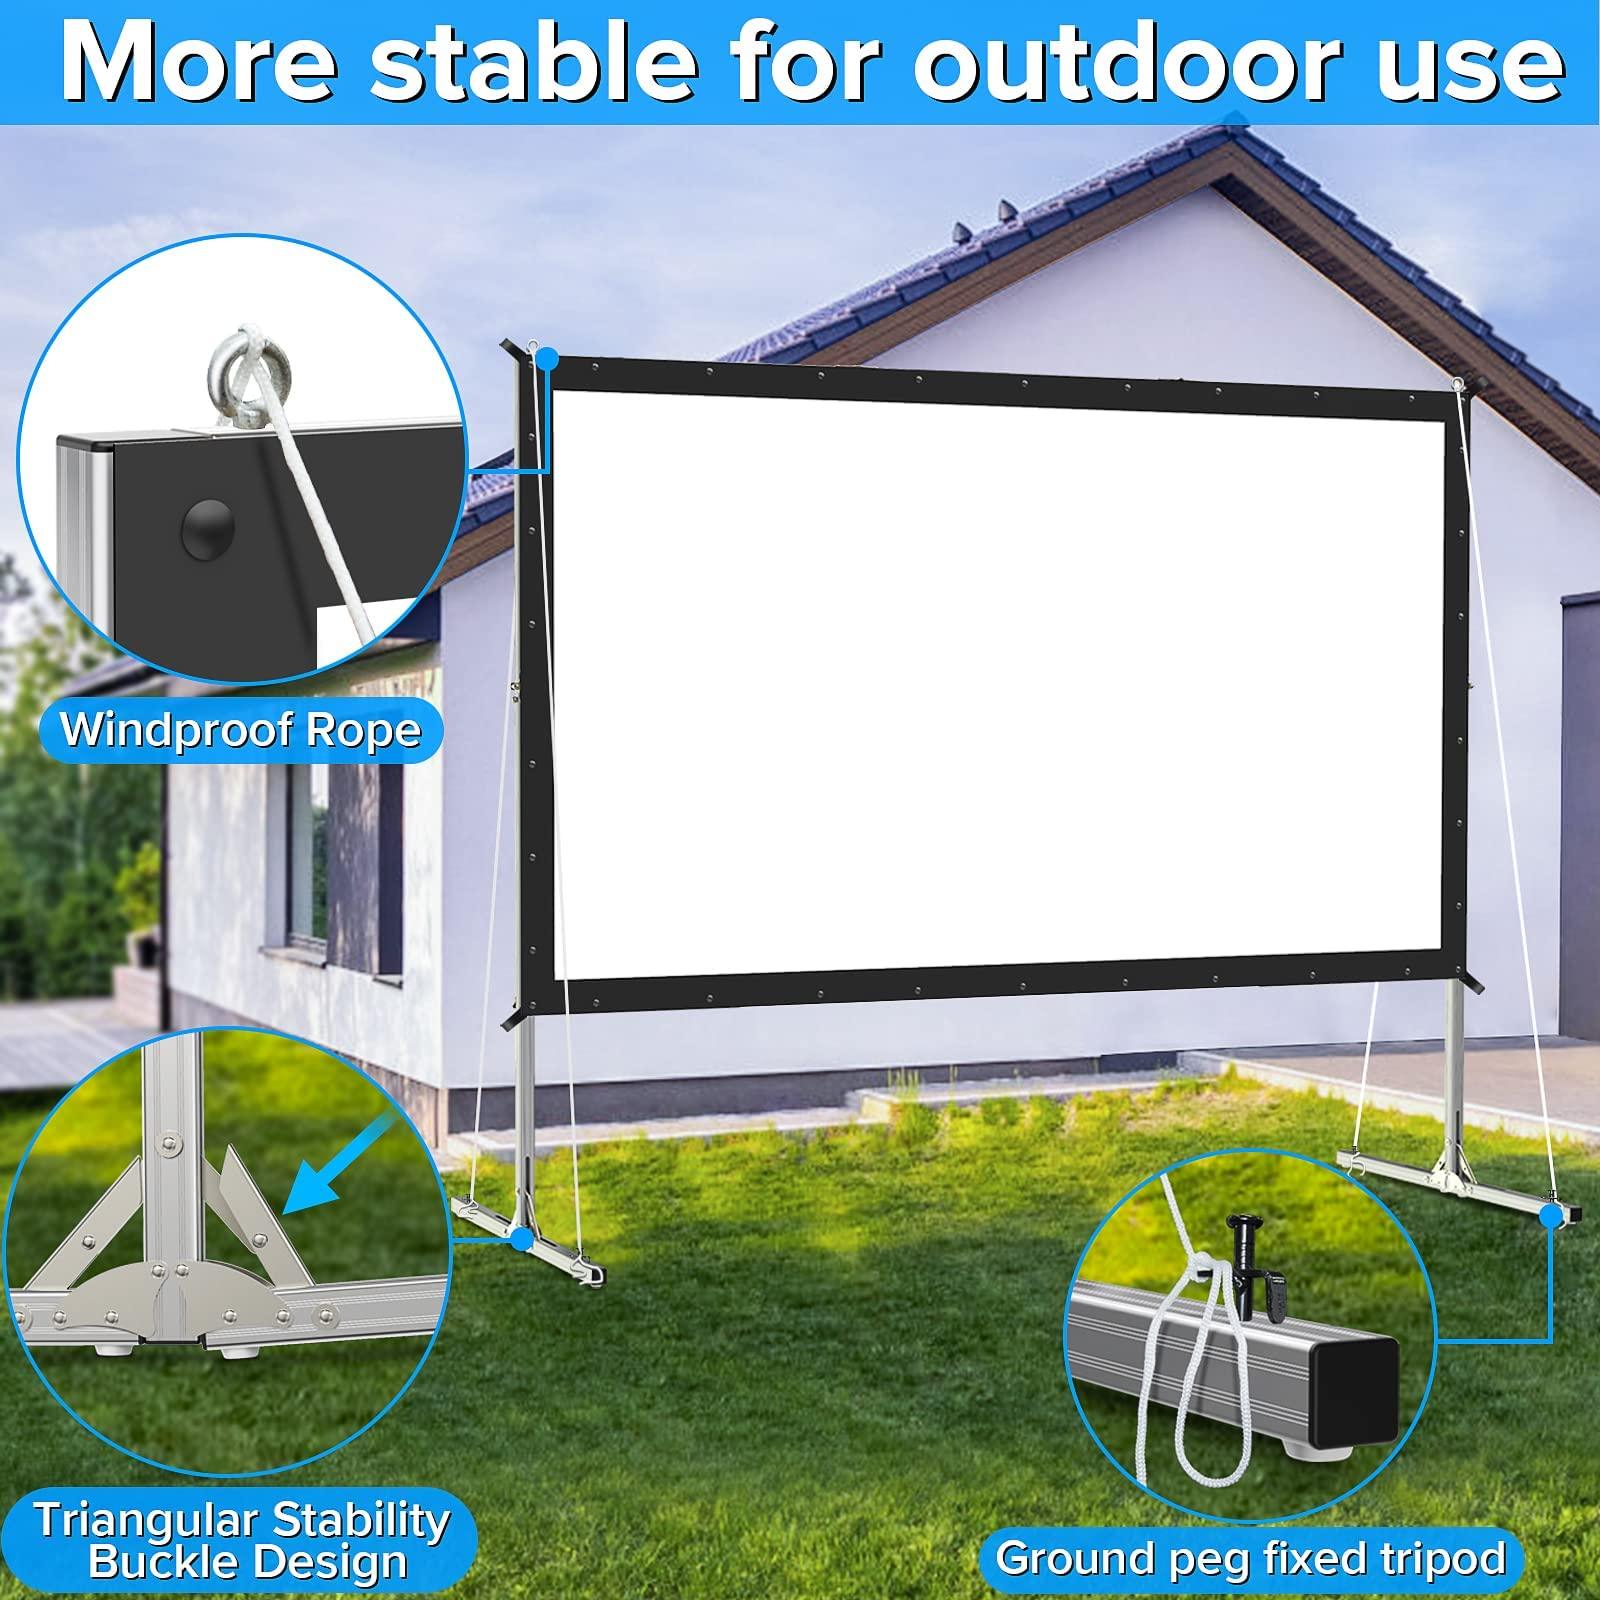 Projector Screen Outdoor,JWSIT 120 inch Outdoor Movie Screen-Upgraded 3 Layers PVC 16:9 Outdoor Projector Screen,Portable Video Projection Screen with Carrying Bag for Home Theater Backyard - CookCave